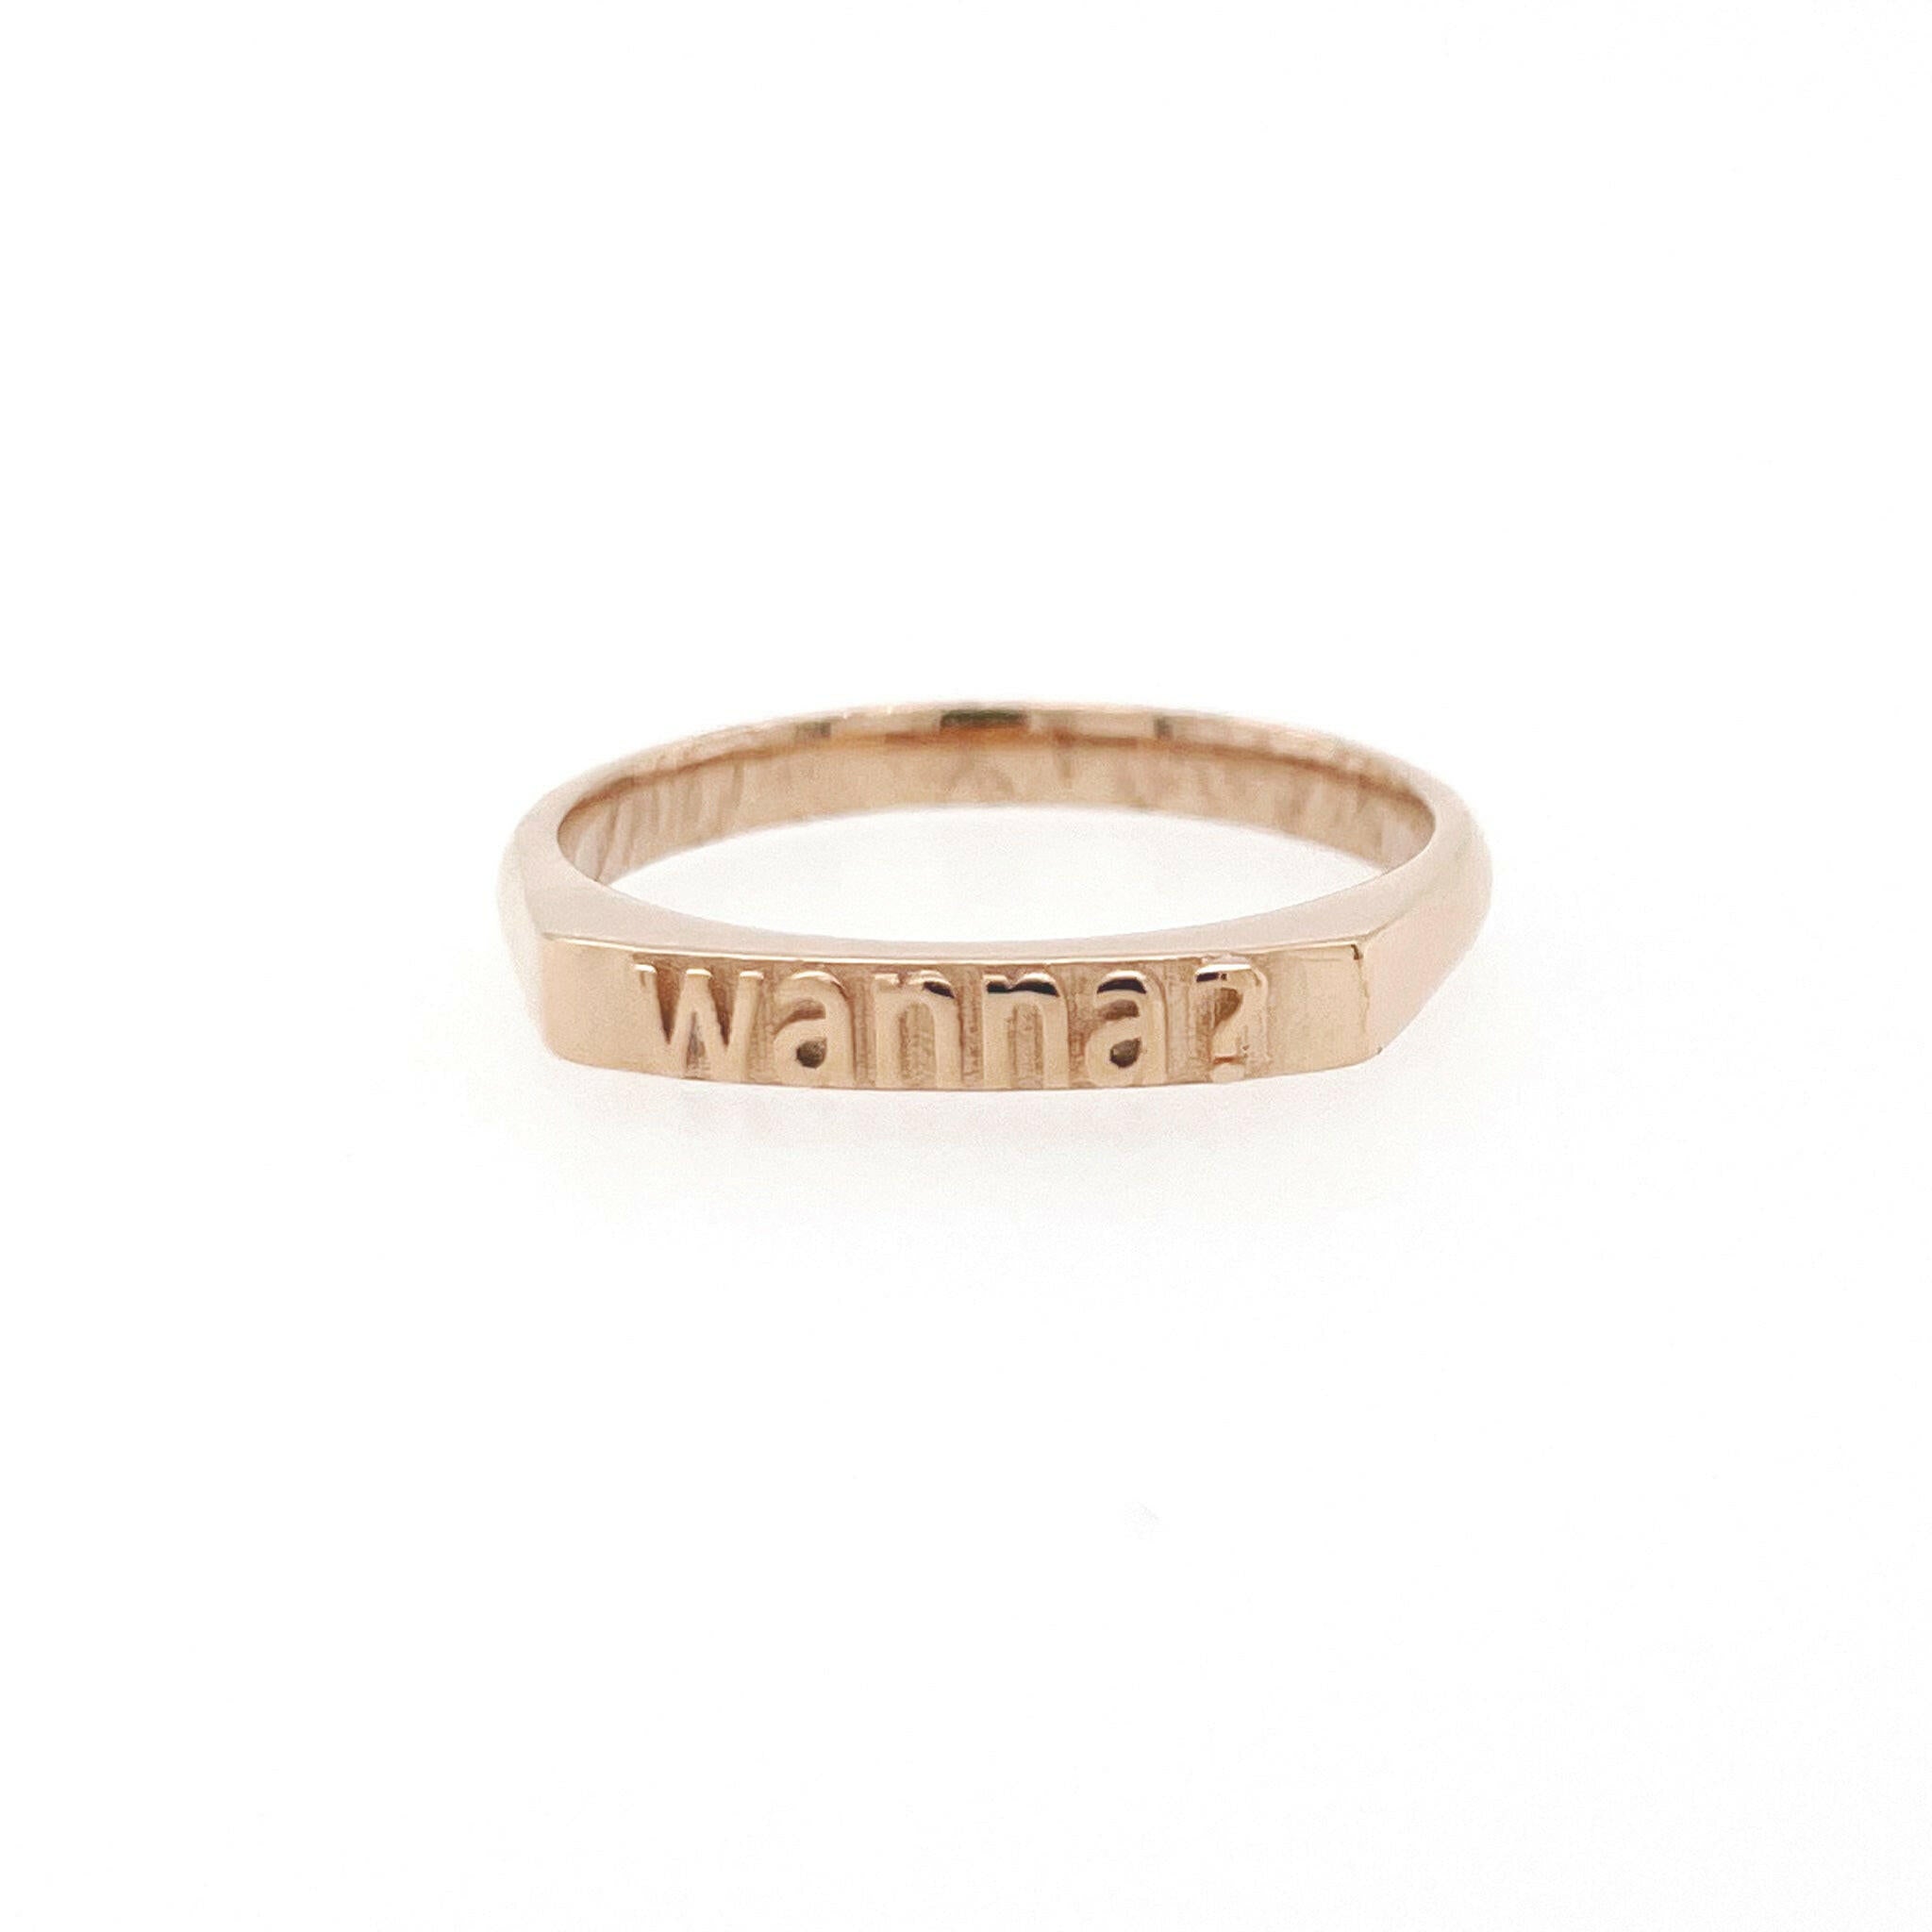 front view of  14 karat rose gold ring with text that reads "wanna?"